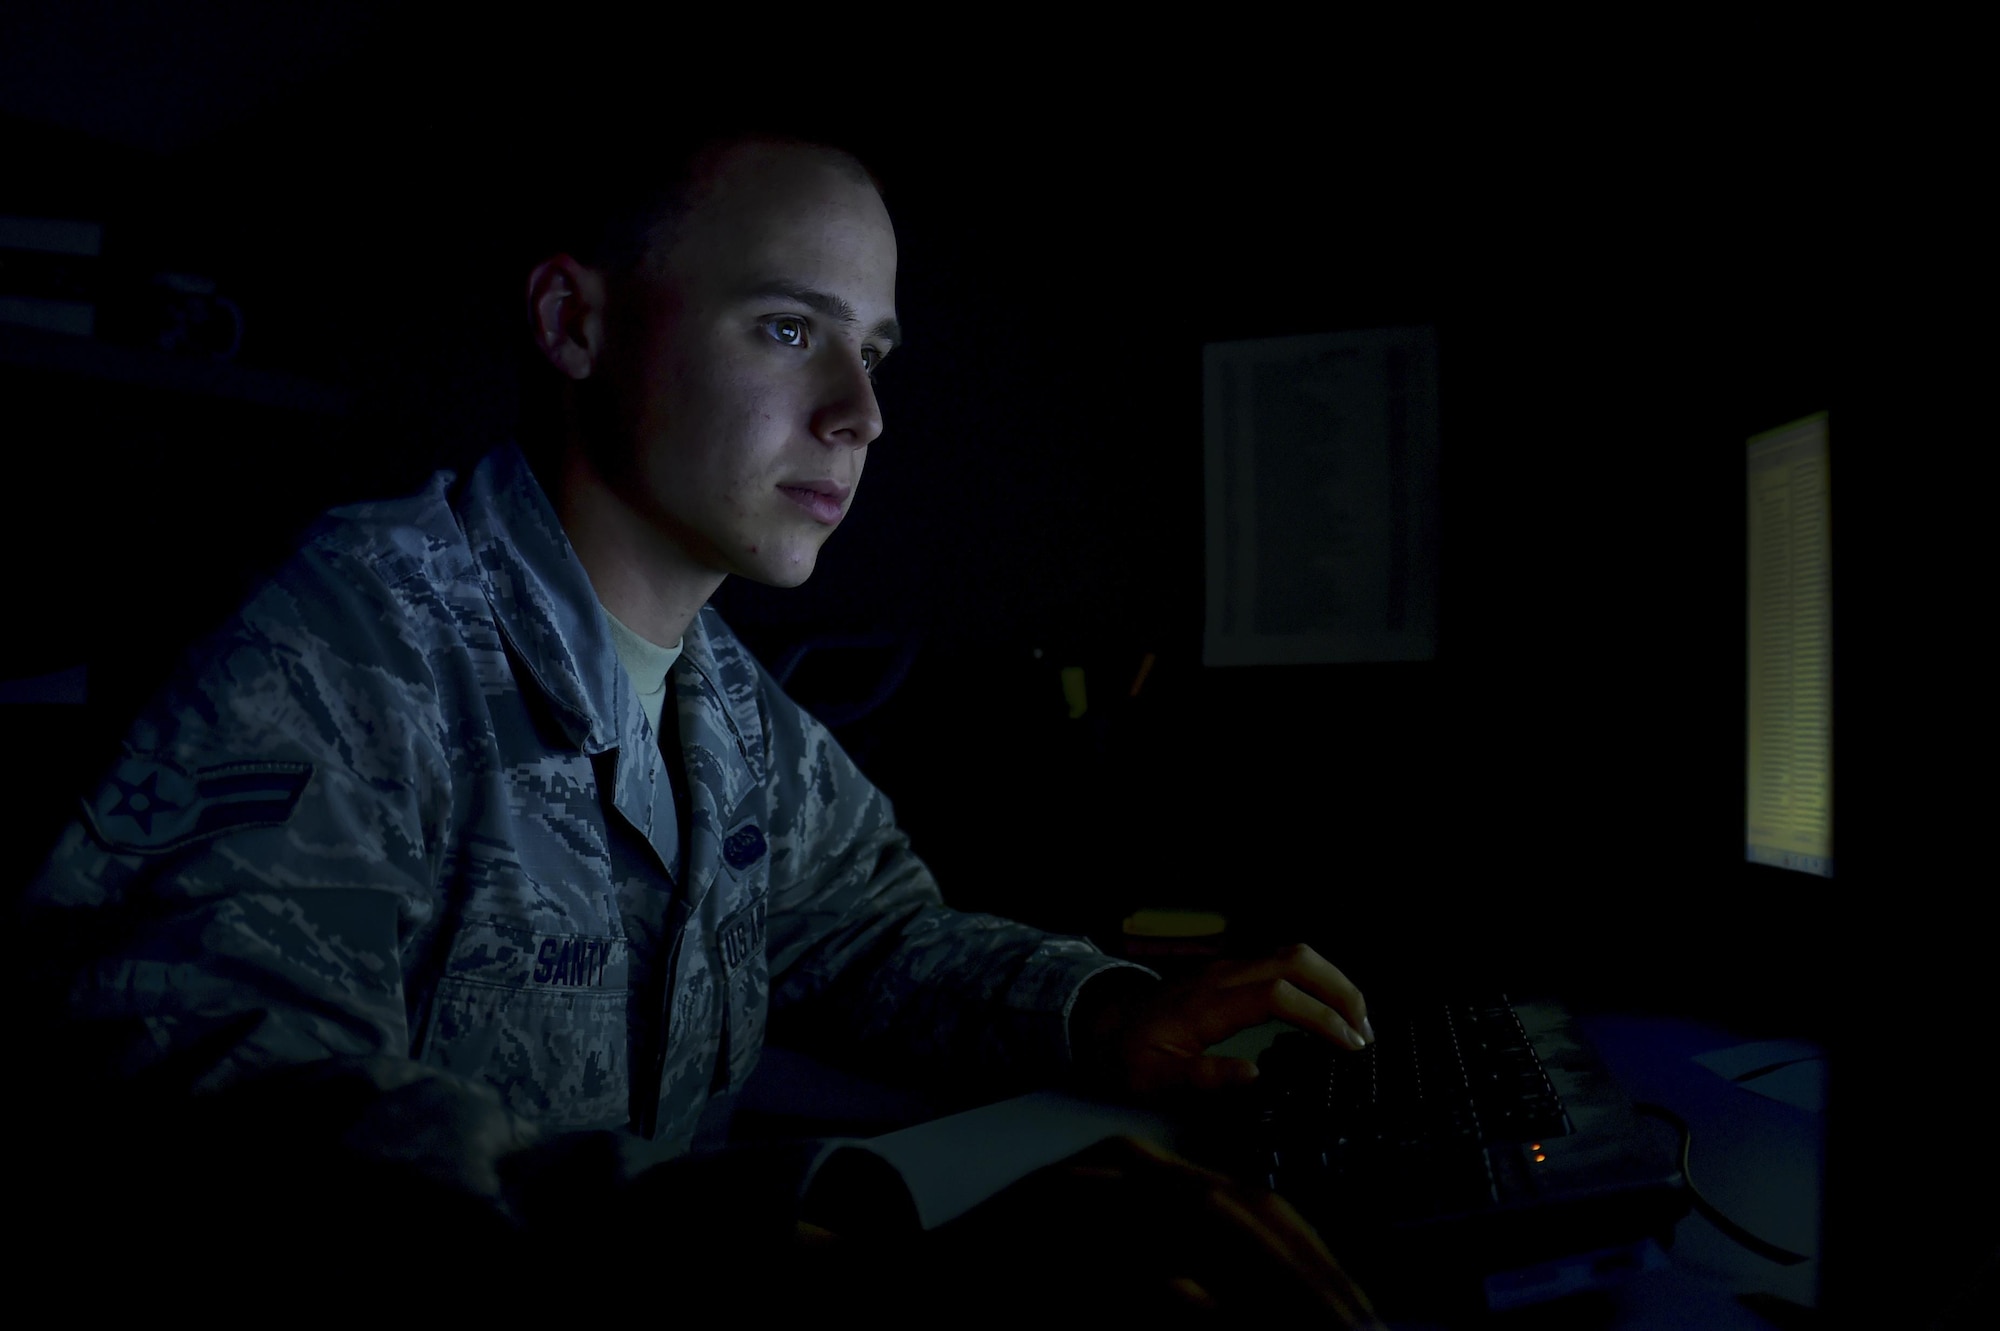 Airman 1st Class Tyler C. Santy, 460th Space Communication Squadron network administrator, reviews information Oct. 20, 2016, at Buckley Air Force Base, Colo. As a network administrator, Santy is responsible for maintaining the security of the installation’s networks. (U.S. Air Force photo by Airman Holden S. Faul/ Released)